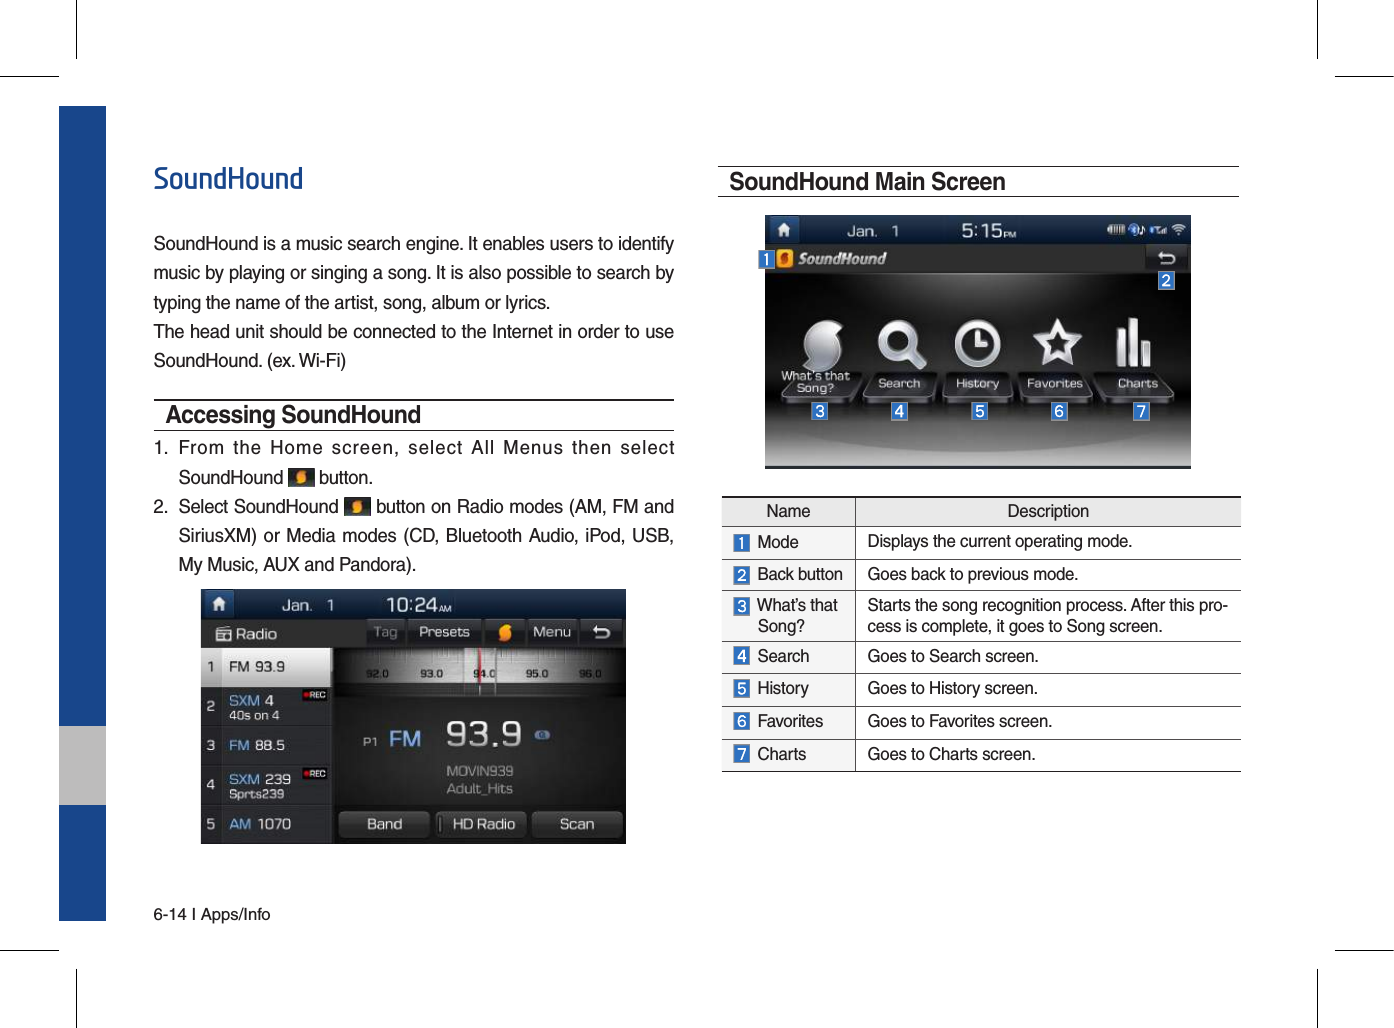 6-14 I Apps/InfoSoundHoundSoundHound is a music search engine. It enables users to identify music by playing or singing a song. It is also possible to search by typing the name of the artist, song, album or lyrics.The head unit should be connected to the Internet in order to use SoundHound. (ex. Wi-Fi)Accessing SoundHound 1.  From  the  Home  screen,  select  All  Menus  then  selectSoundHound   button.2.   Select SoundHound   button on Radio modes (AM, FM andSiriusXM) or Media modes (CD, Bluetooth Audio, iPod, USB,My Music, AUX and Pandora). SoundHound Main ScreenName Description Mode Displays the current operating mode.  Back button Goes back to previous mode.  What’s that   Song? Starts the song recognition process. After this pro-cess is complete, it goes to Song screen.  Search Goes to Search screen. History Goes to History screen.  Favorites Goes to Favorites screen. Charts Goes to Charts screen.